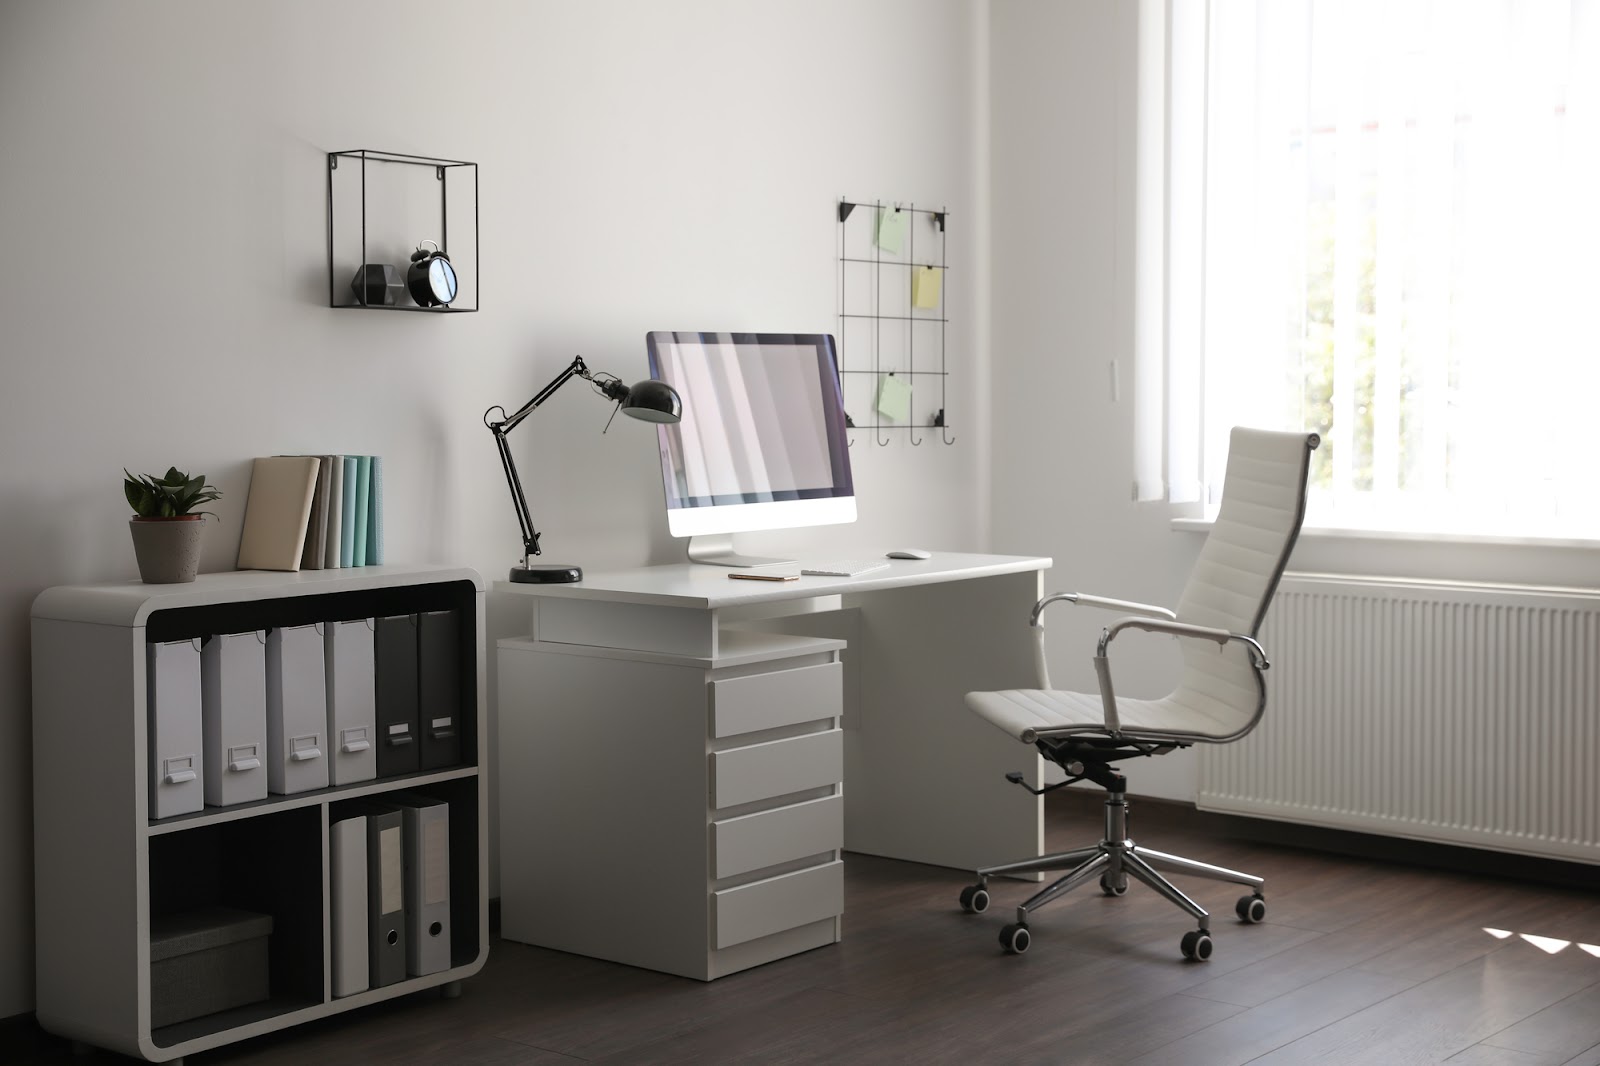 Stylish office workstation setup with ergonomic office chair, and desk